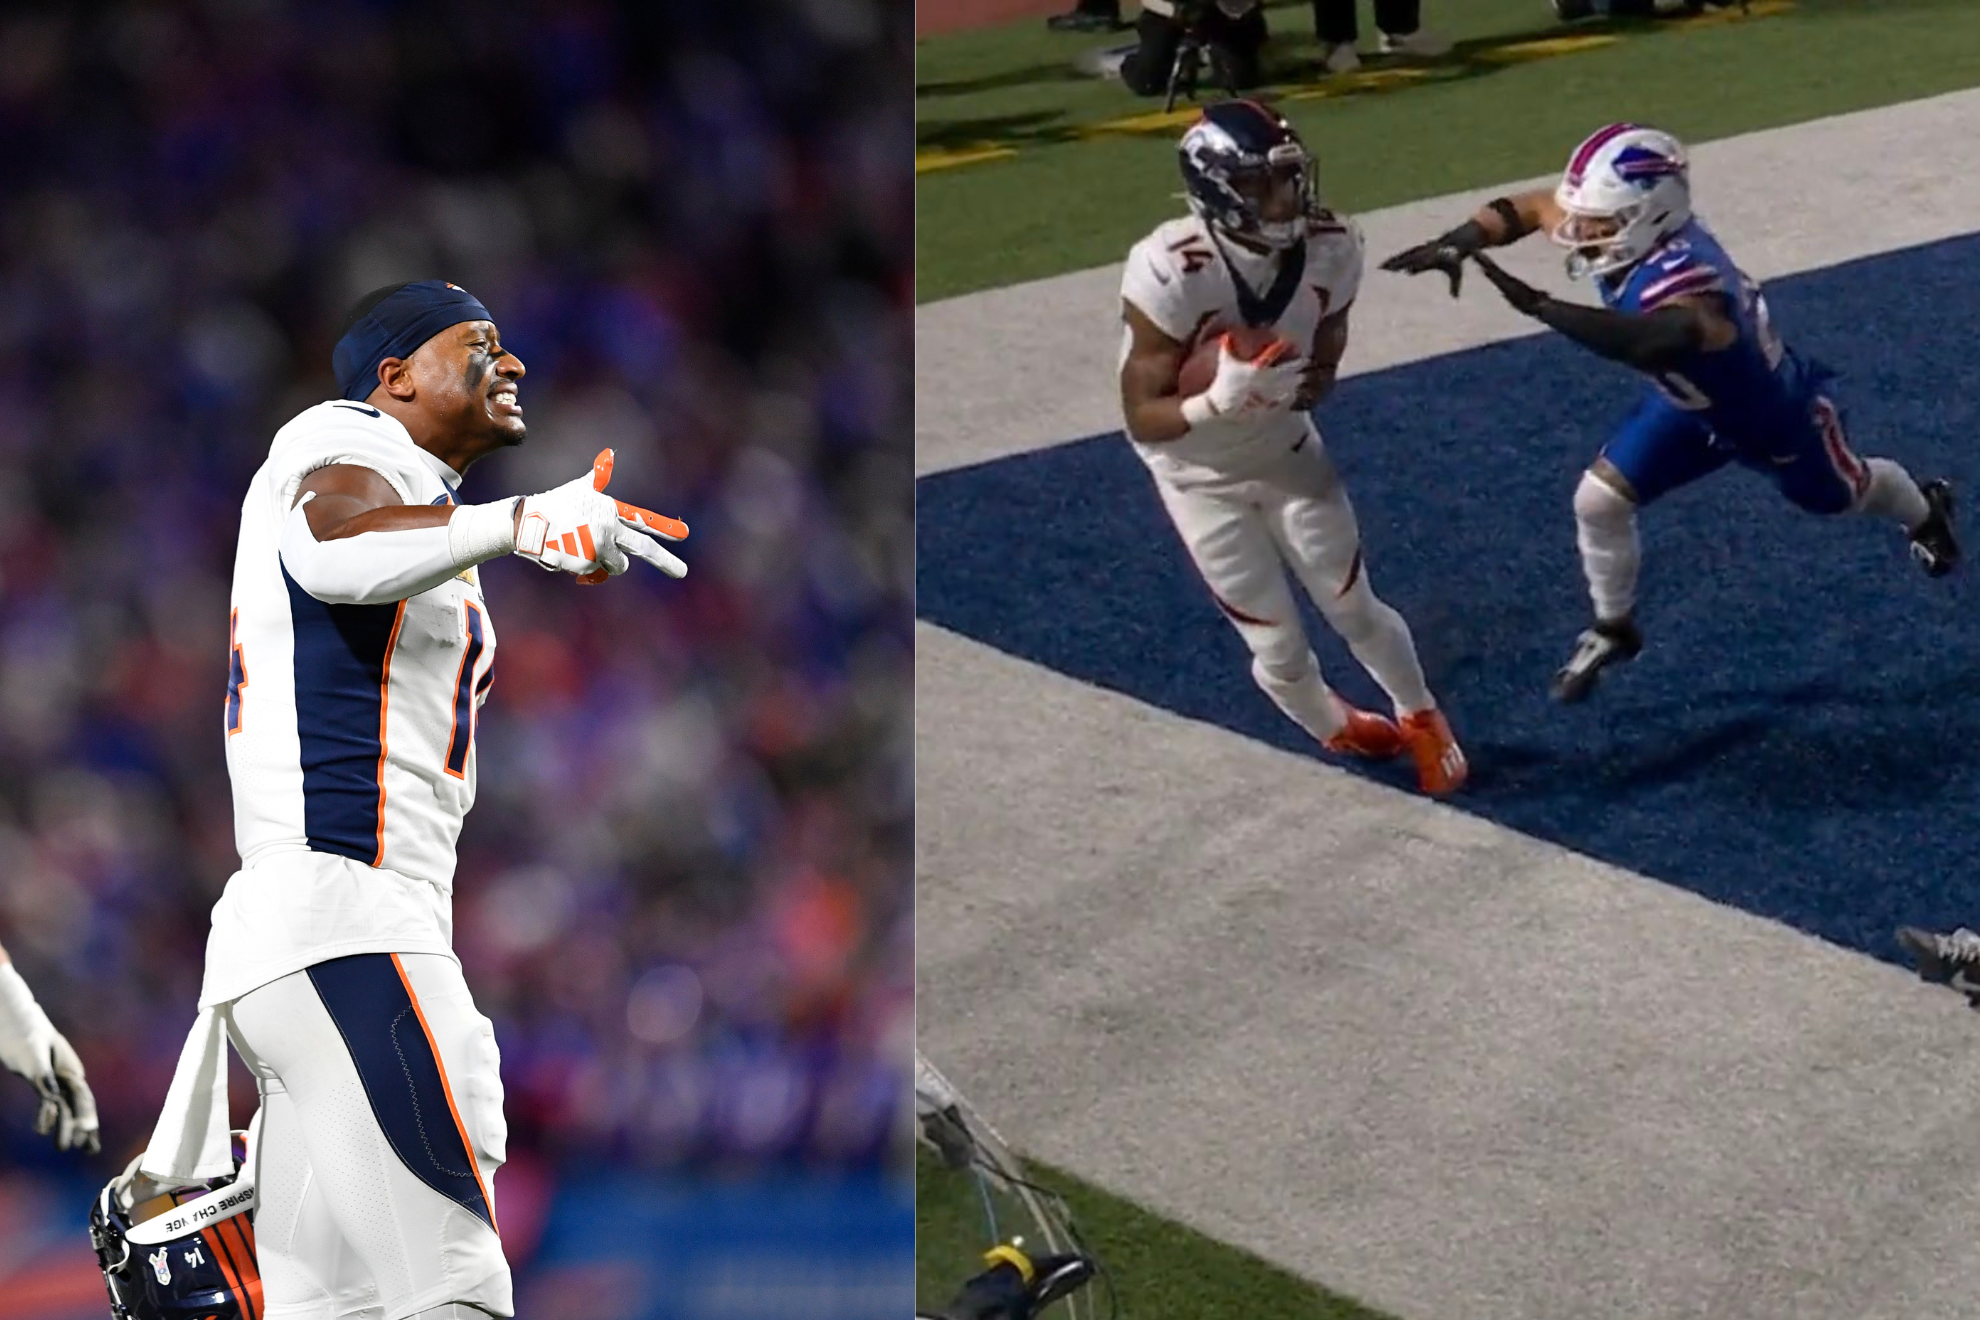 Sutton extended Denver's first half lead with a sensational catch on 4th & 2.